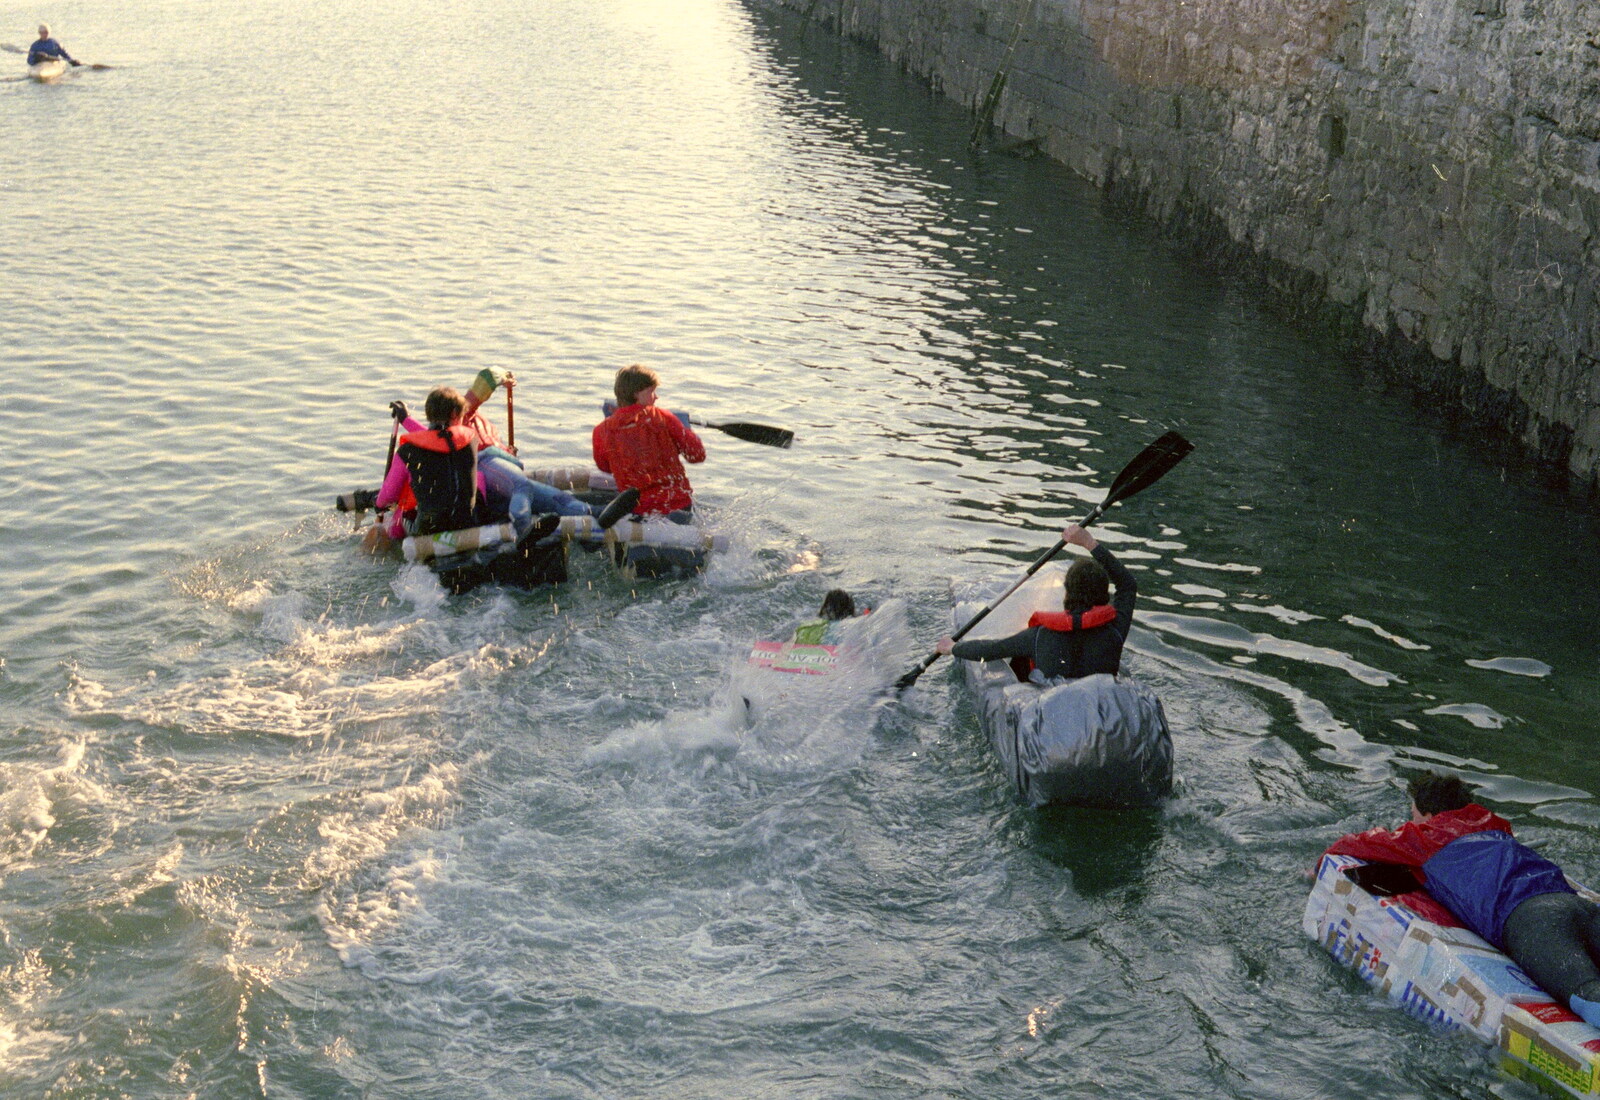 Intrepid rafters head down the slipway at the Yacht club from Uni: Canoe Society RAG Raft Madness, Plymouth Sound - 1st March 1986